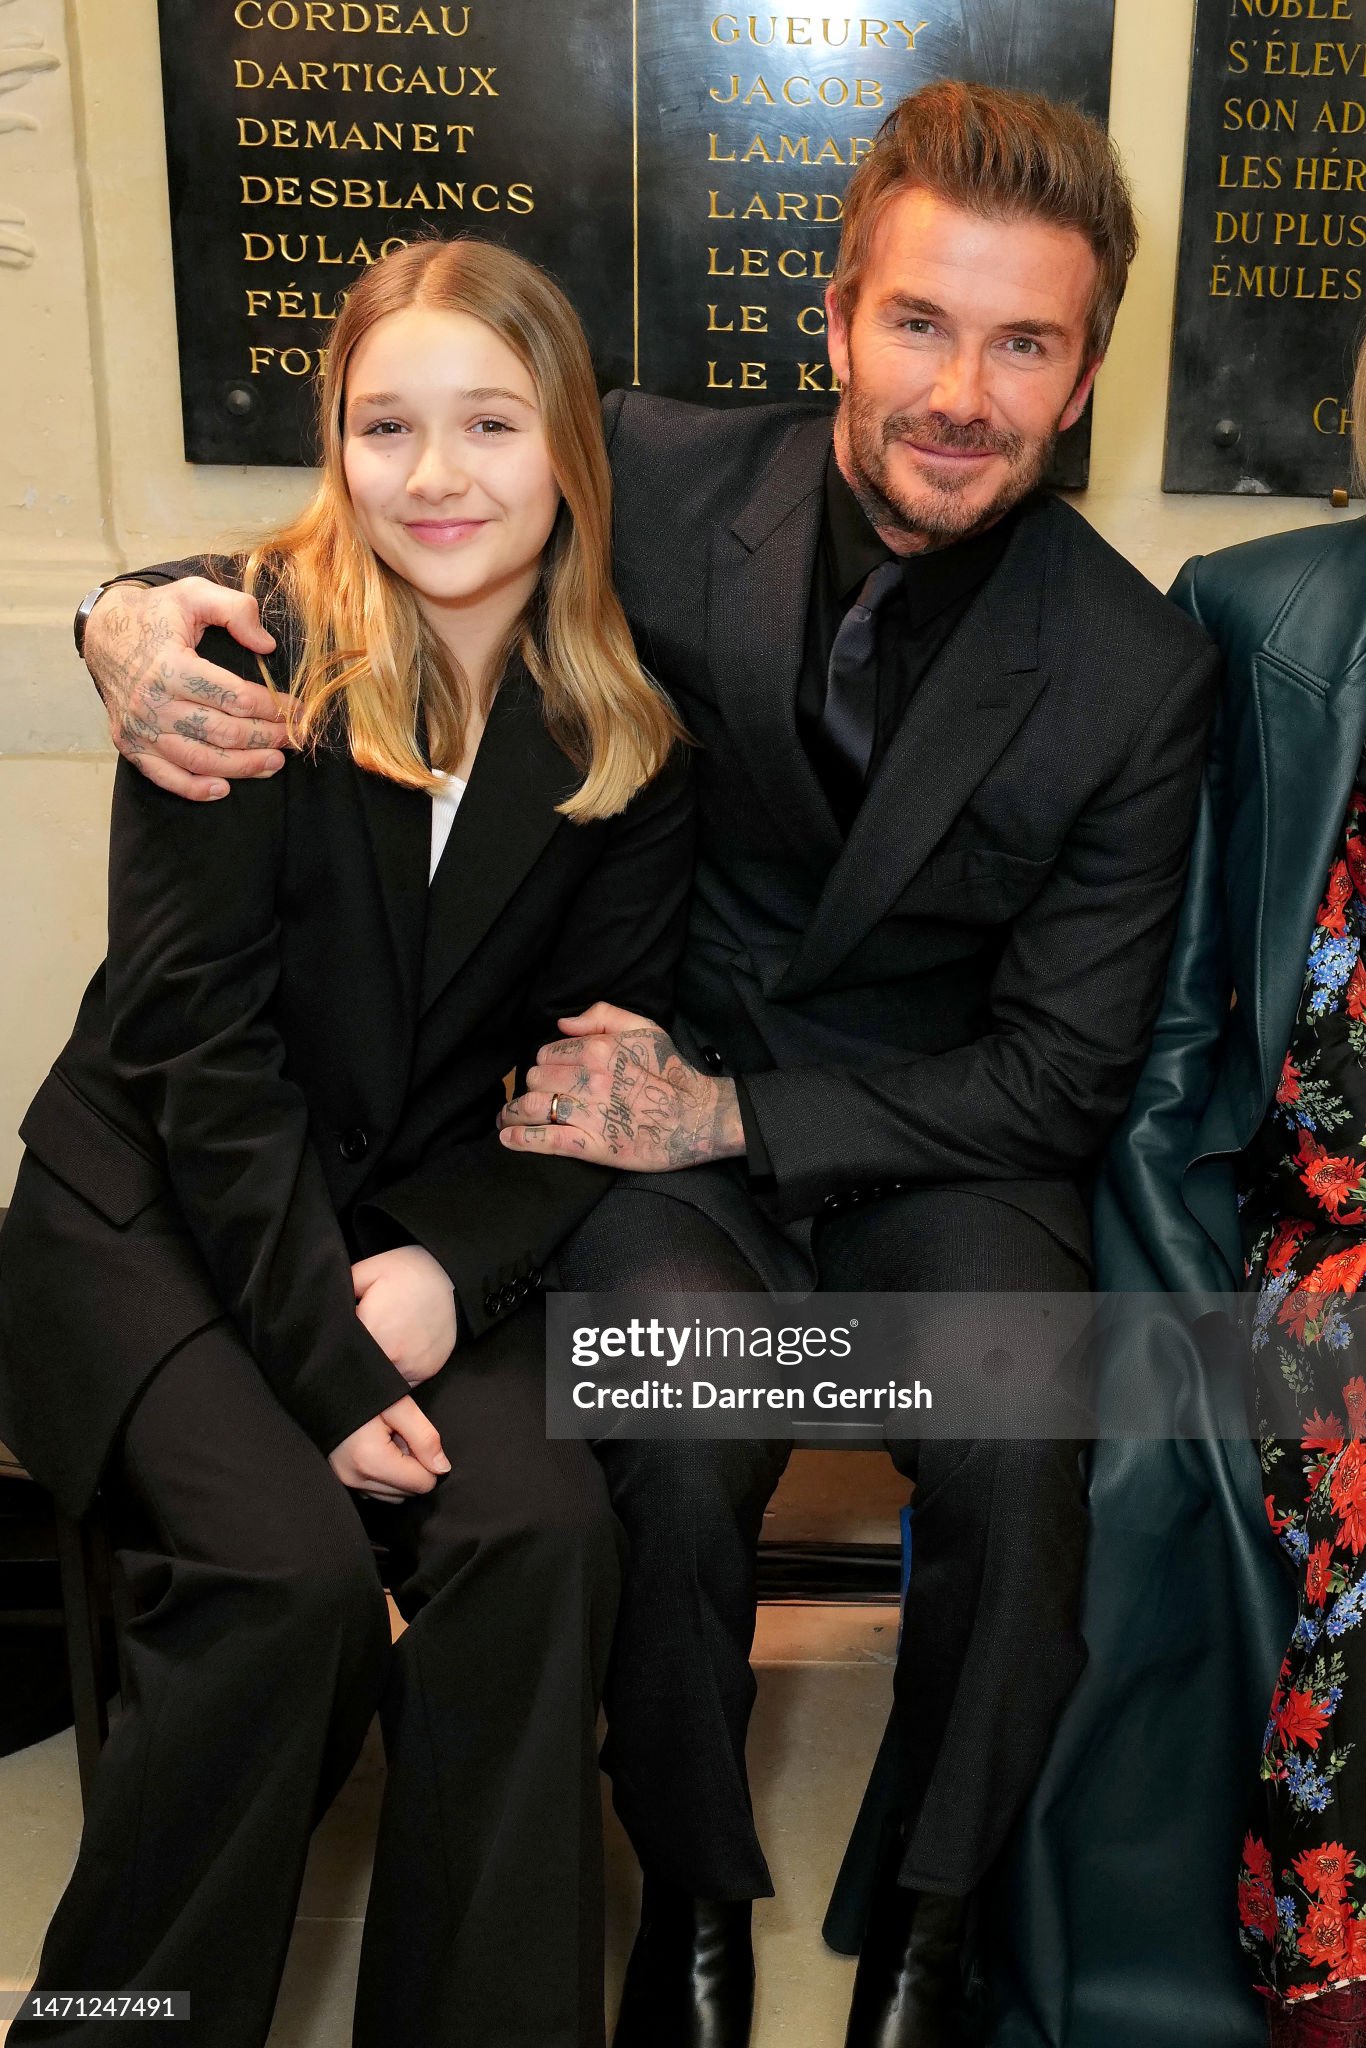 gettyimages-1471247491-2048x2048.jpg